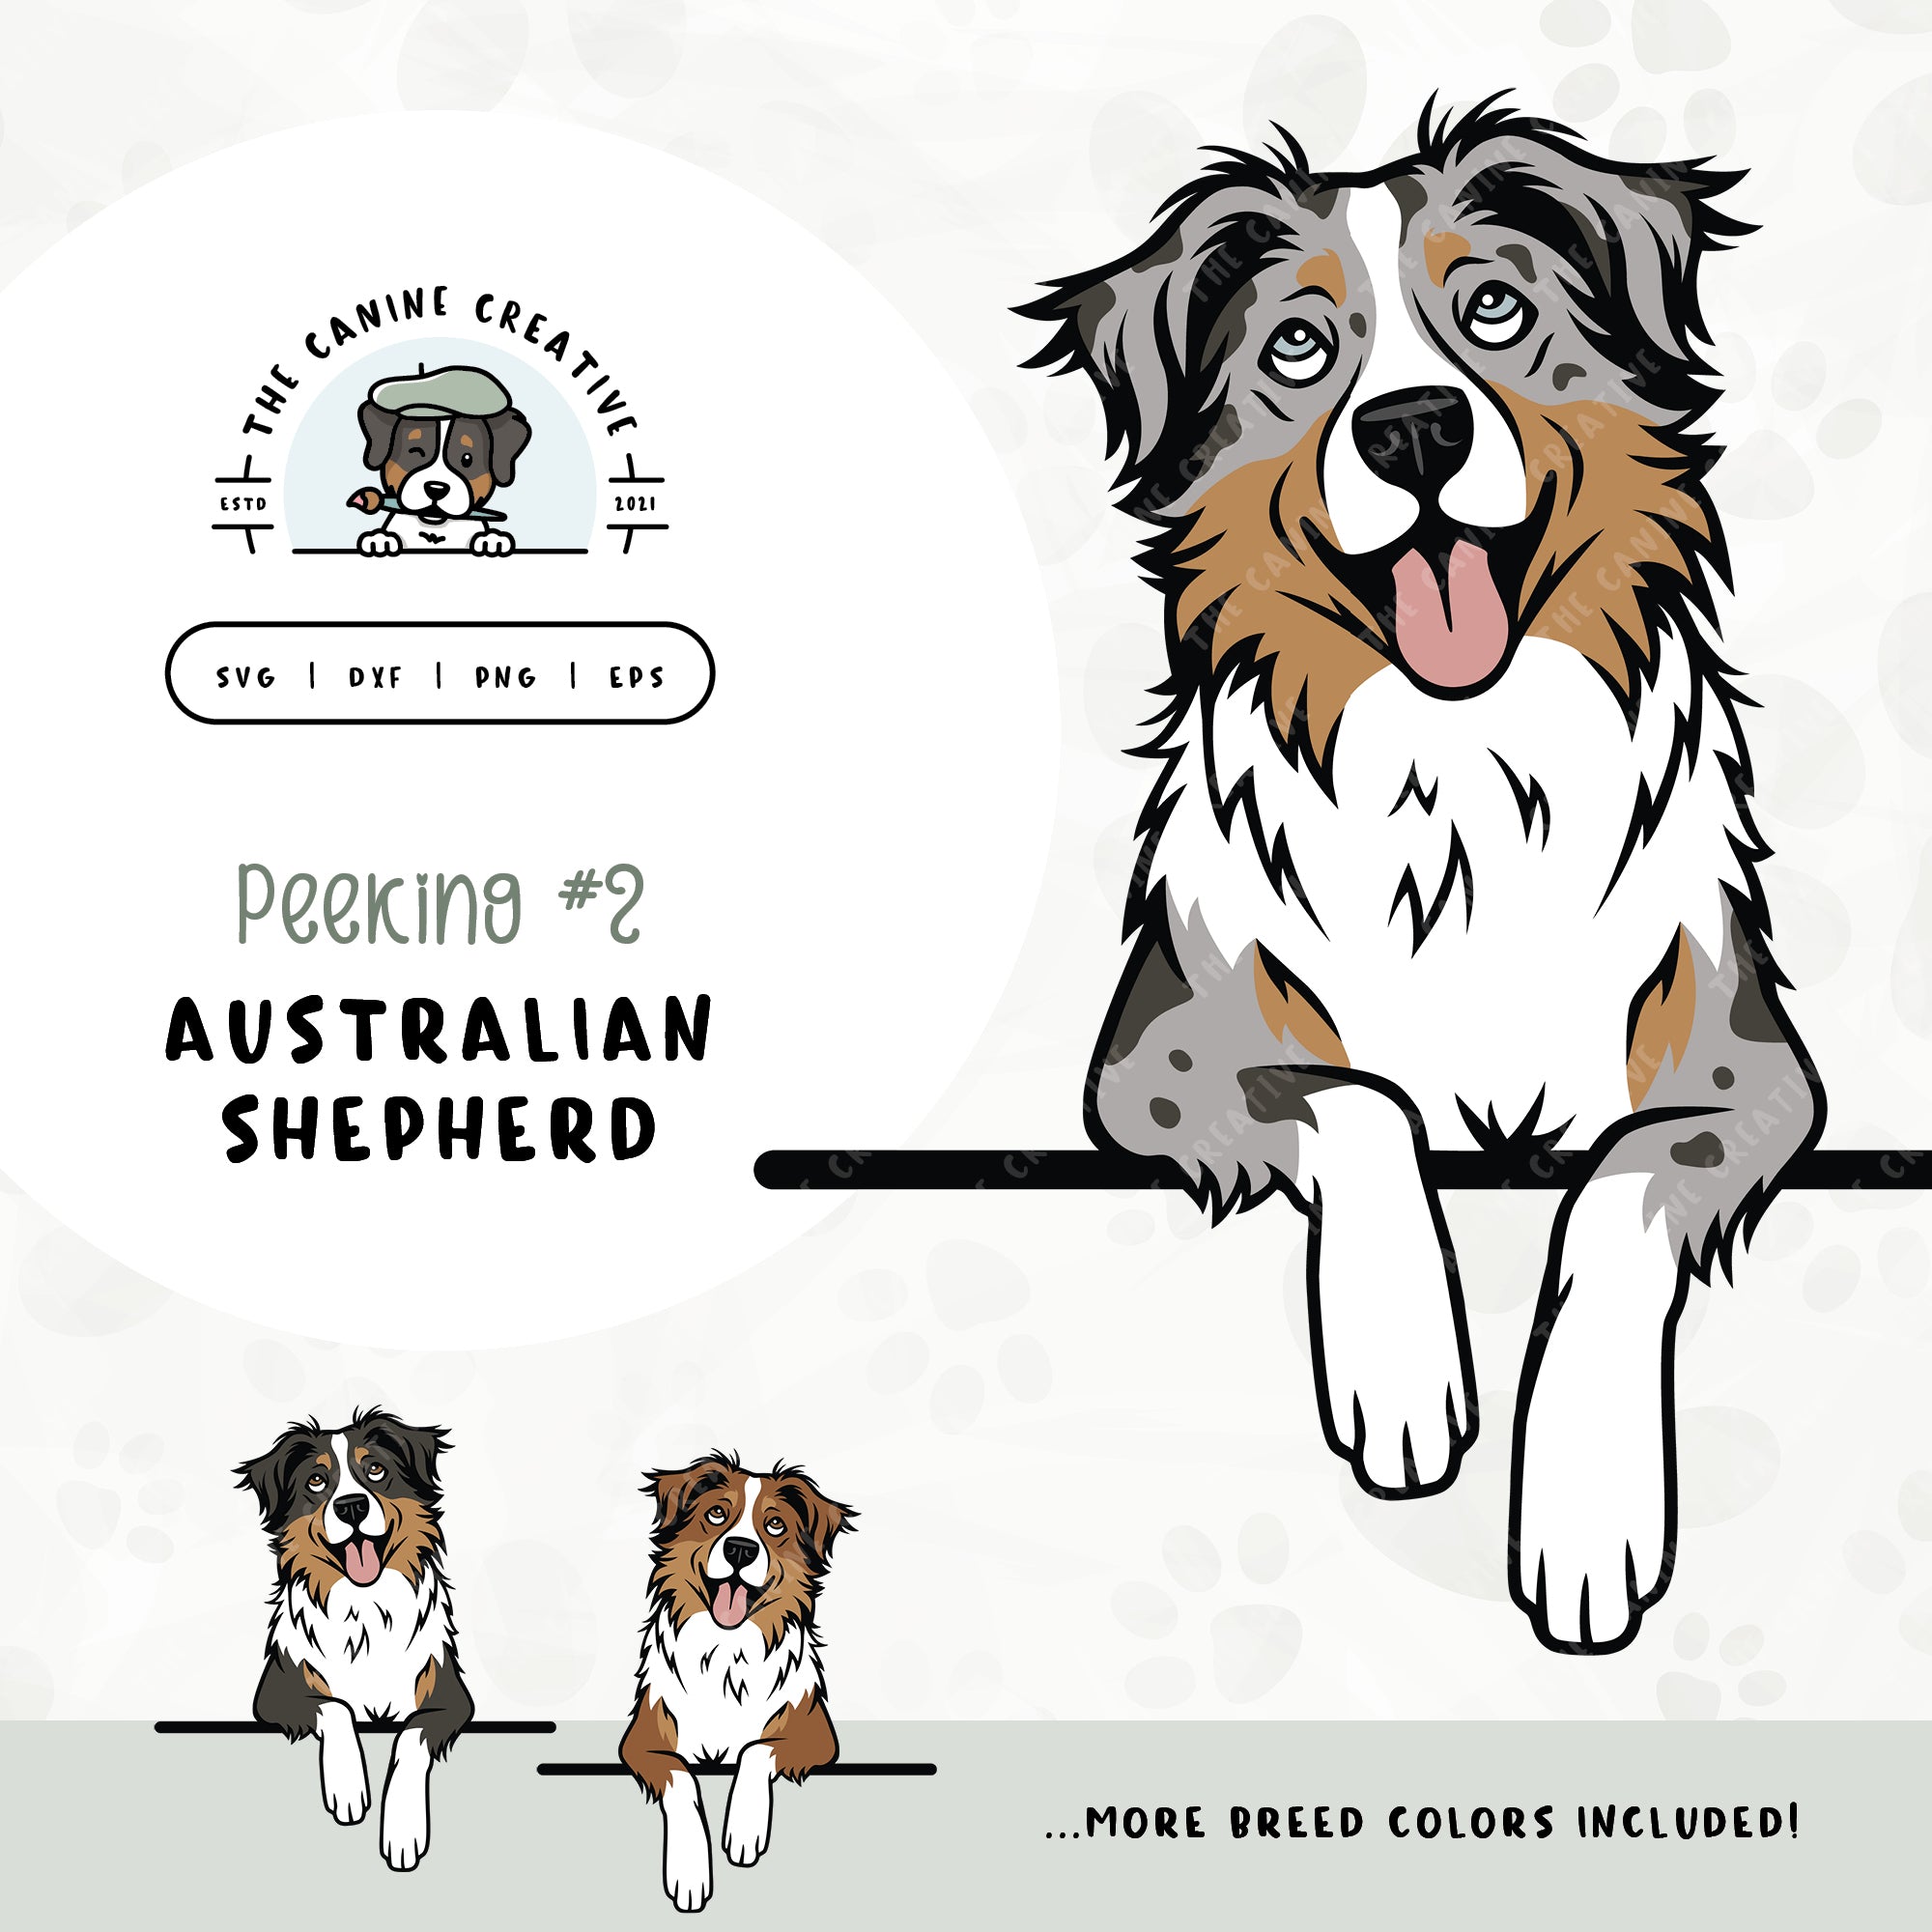 This illustrated design features a peeking Australian Shepherd. File formats include: SVG, DXF, PNG, and EPS.